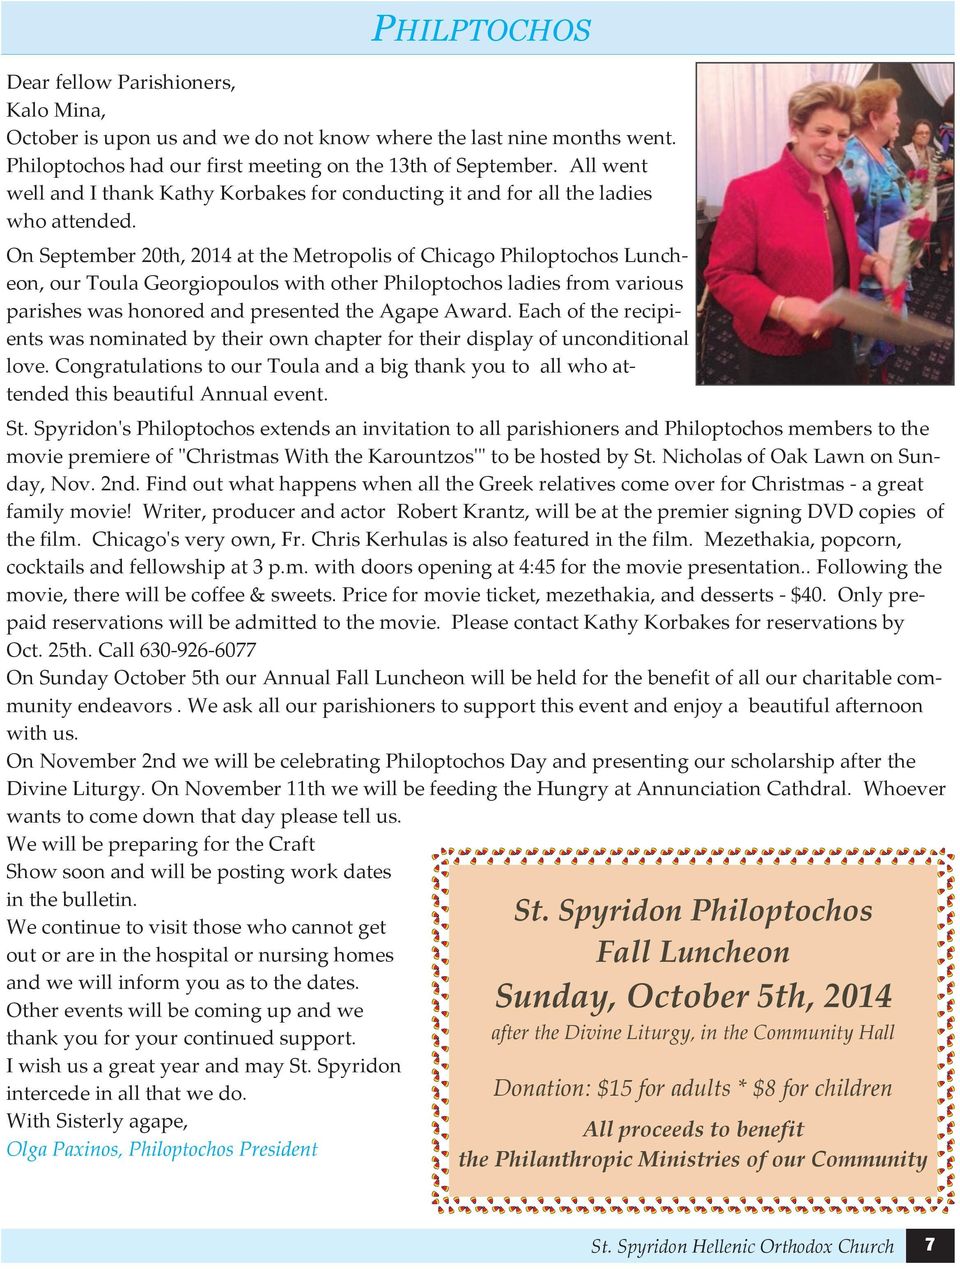 On September 20th, 2014 at the Metropolis of Chicago Philoptochos Luncheon, our Toula Georgiopoulos with other Philoptochos ladies from various parishes was honored and presented the Agape Award.